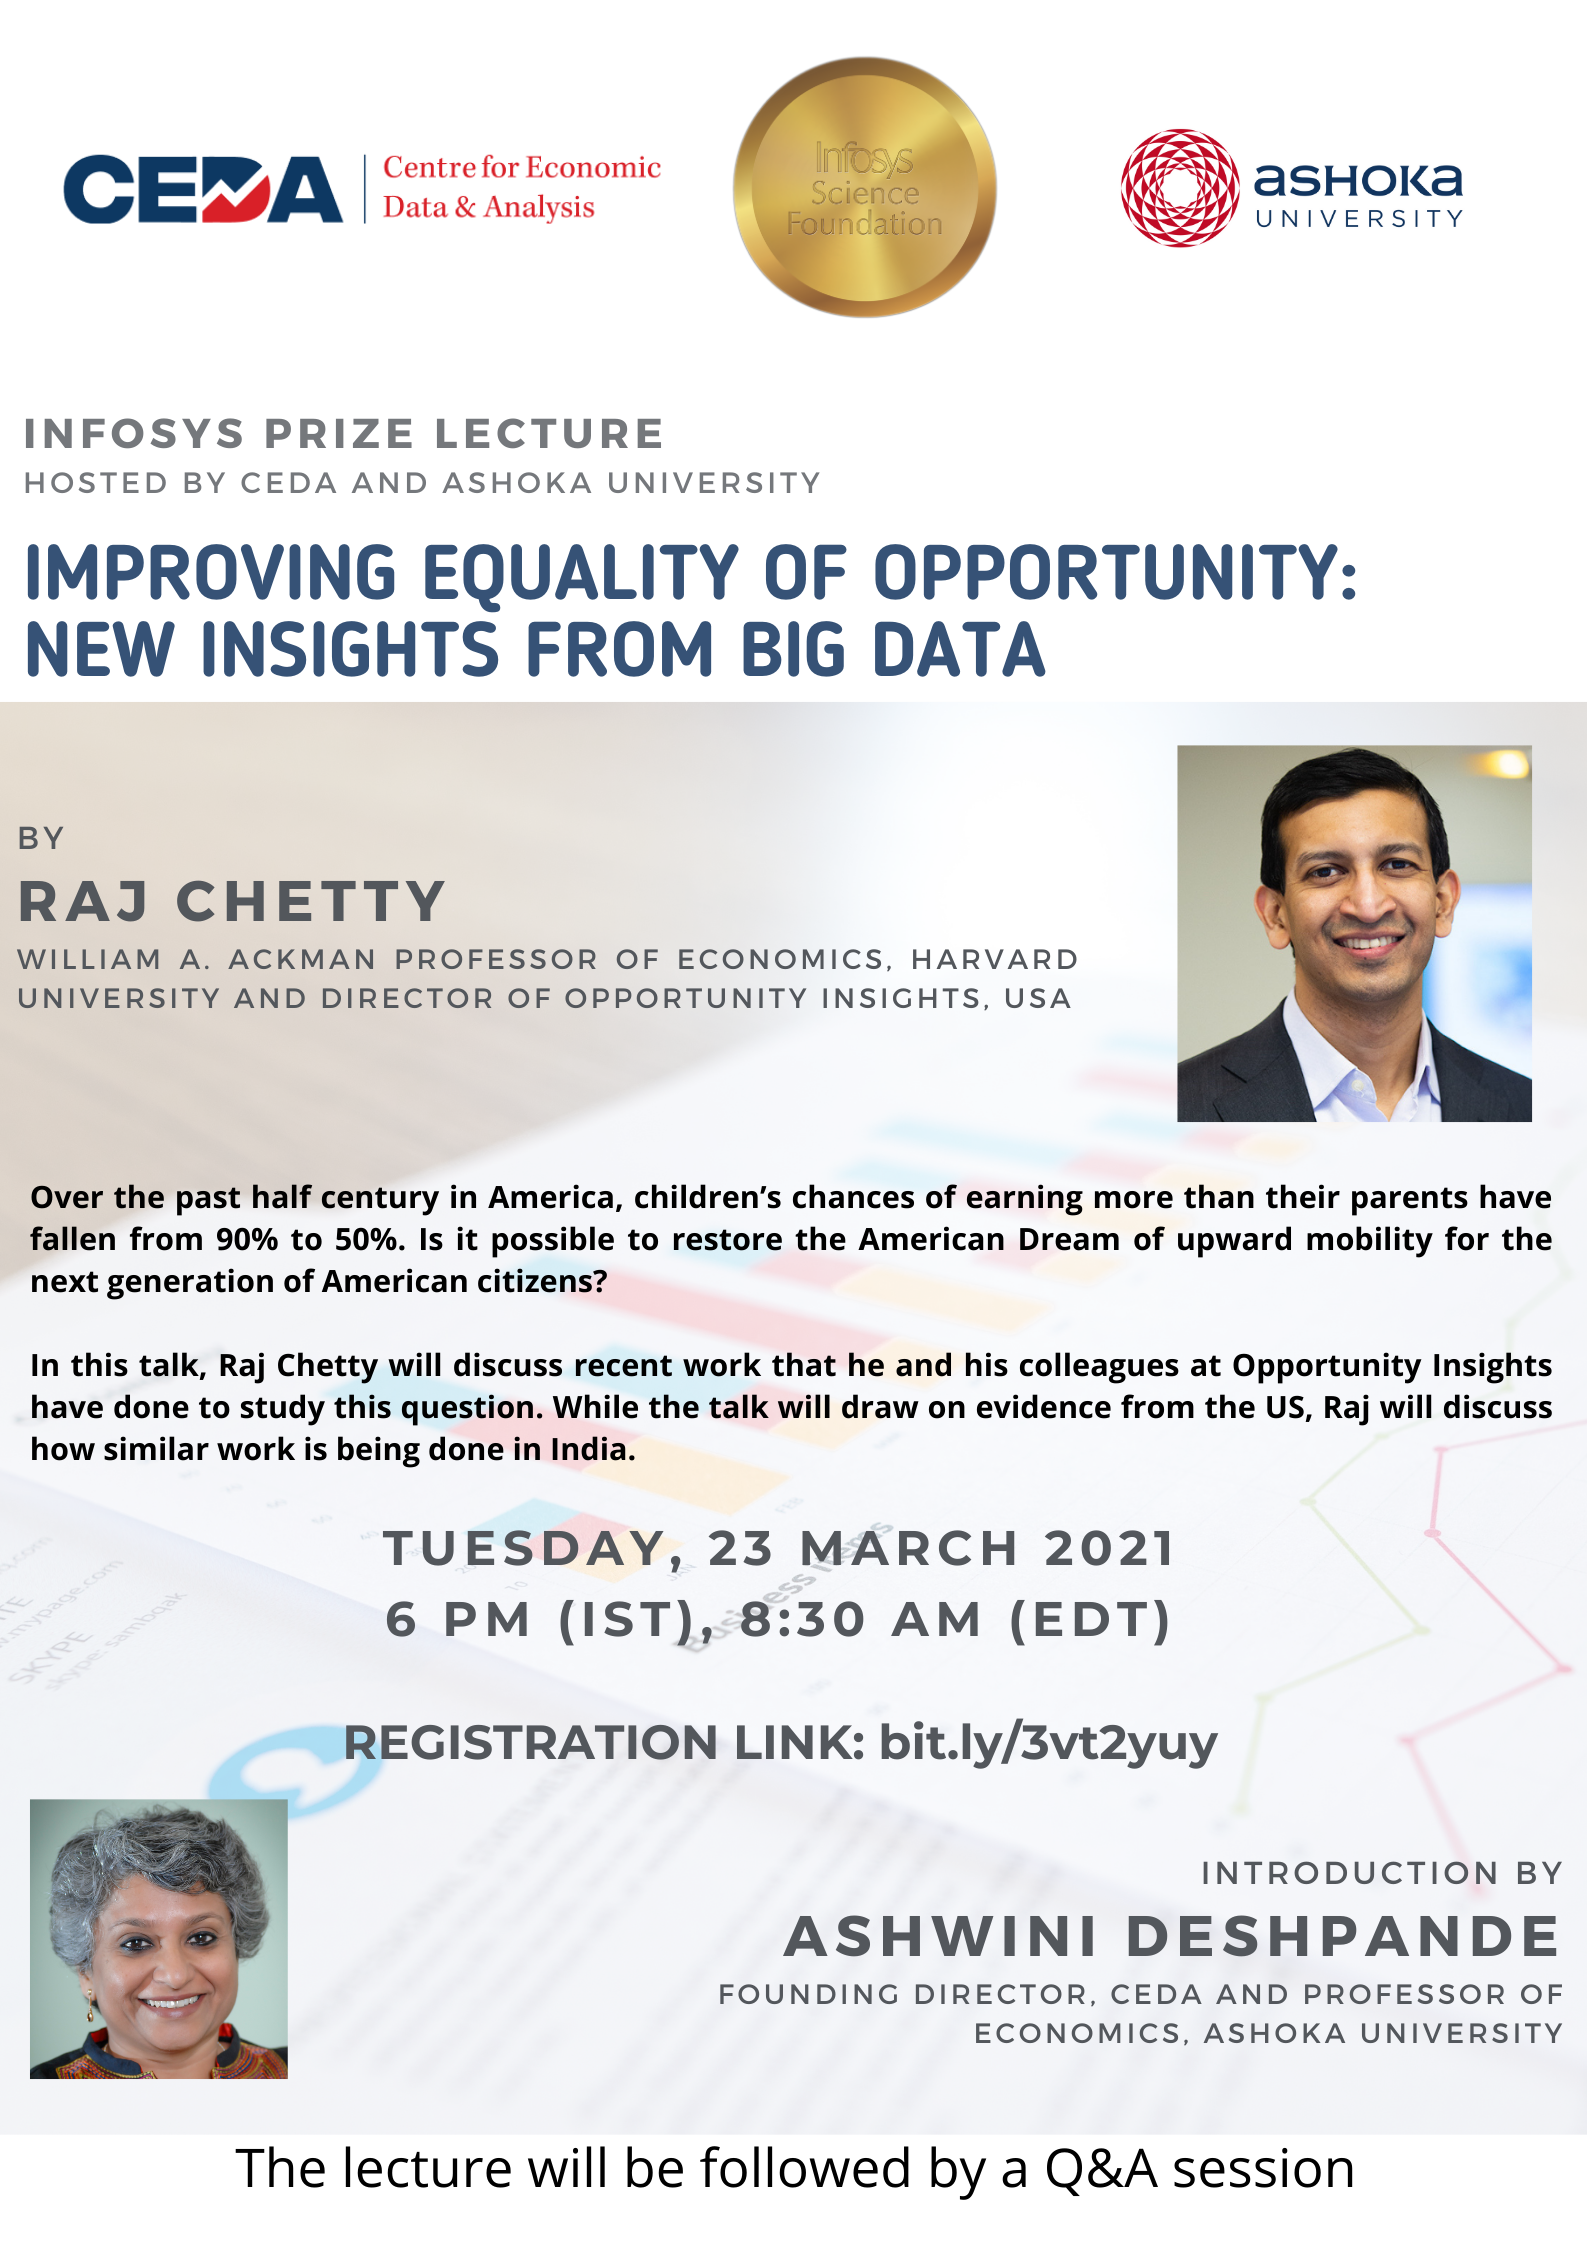 Improving Equality of Opportunity: New Insights from Big Data